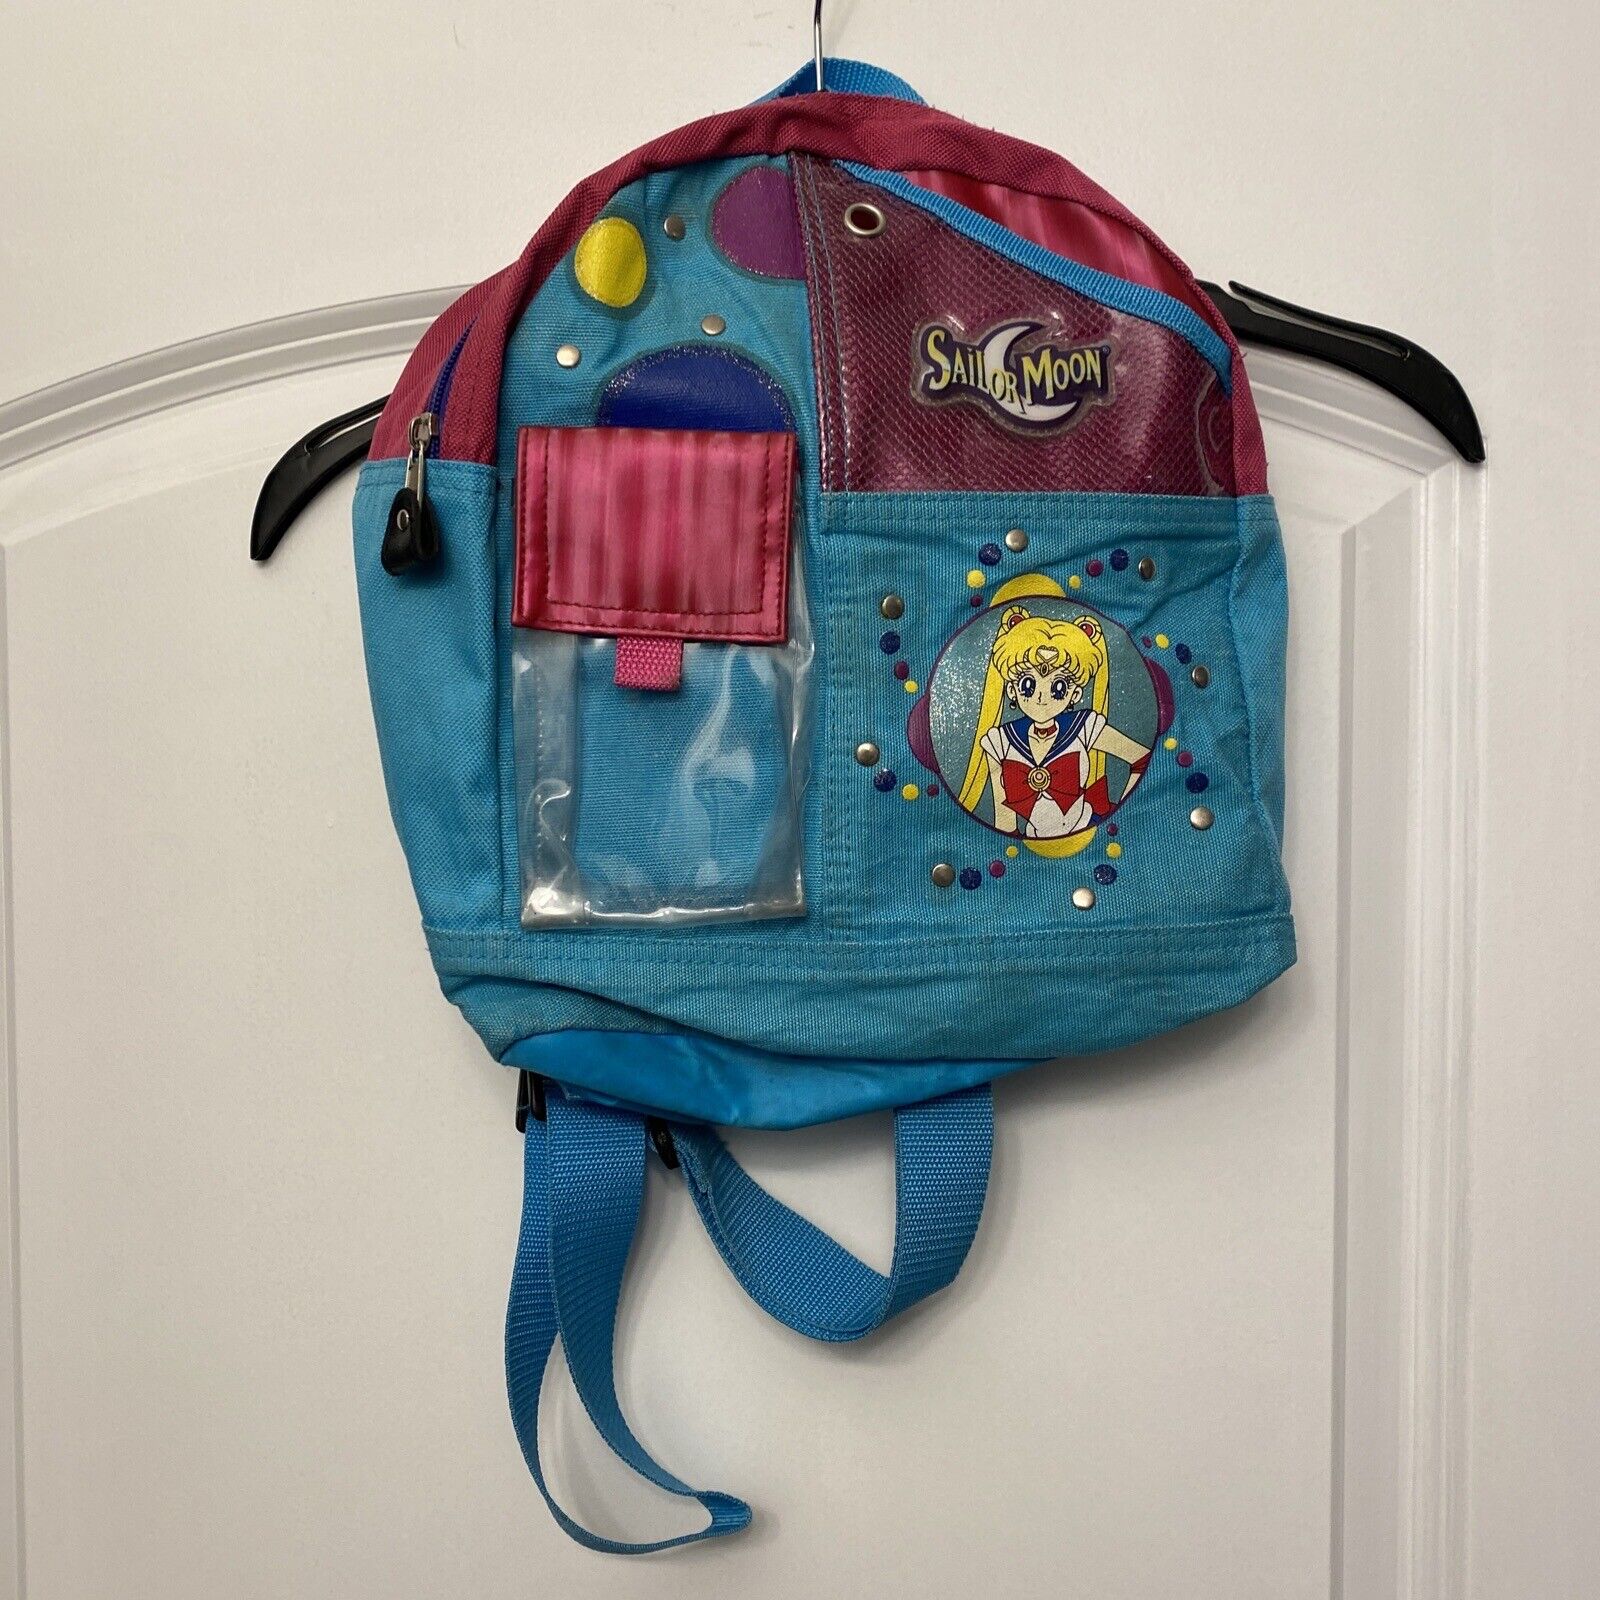 Vintage 2000 Y2K Sailor Moon Pink & Blue Backpack Rare Collectible Anime Cosplay